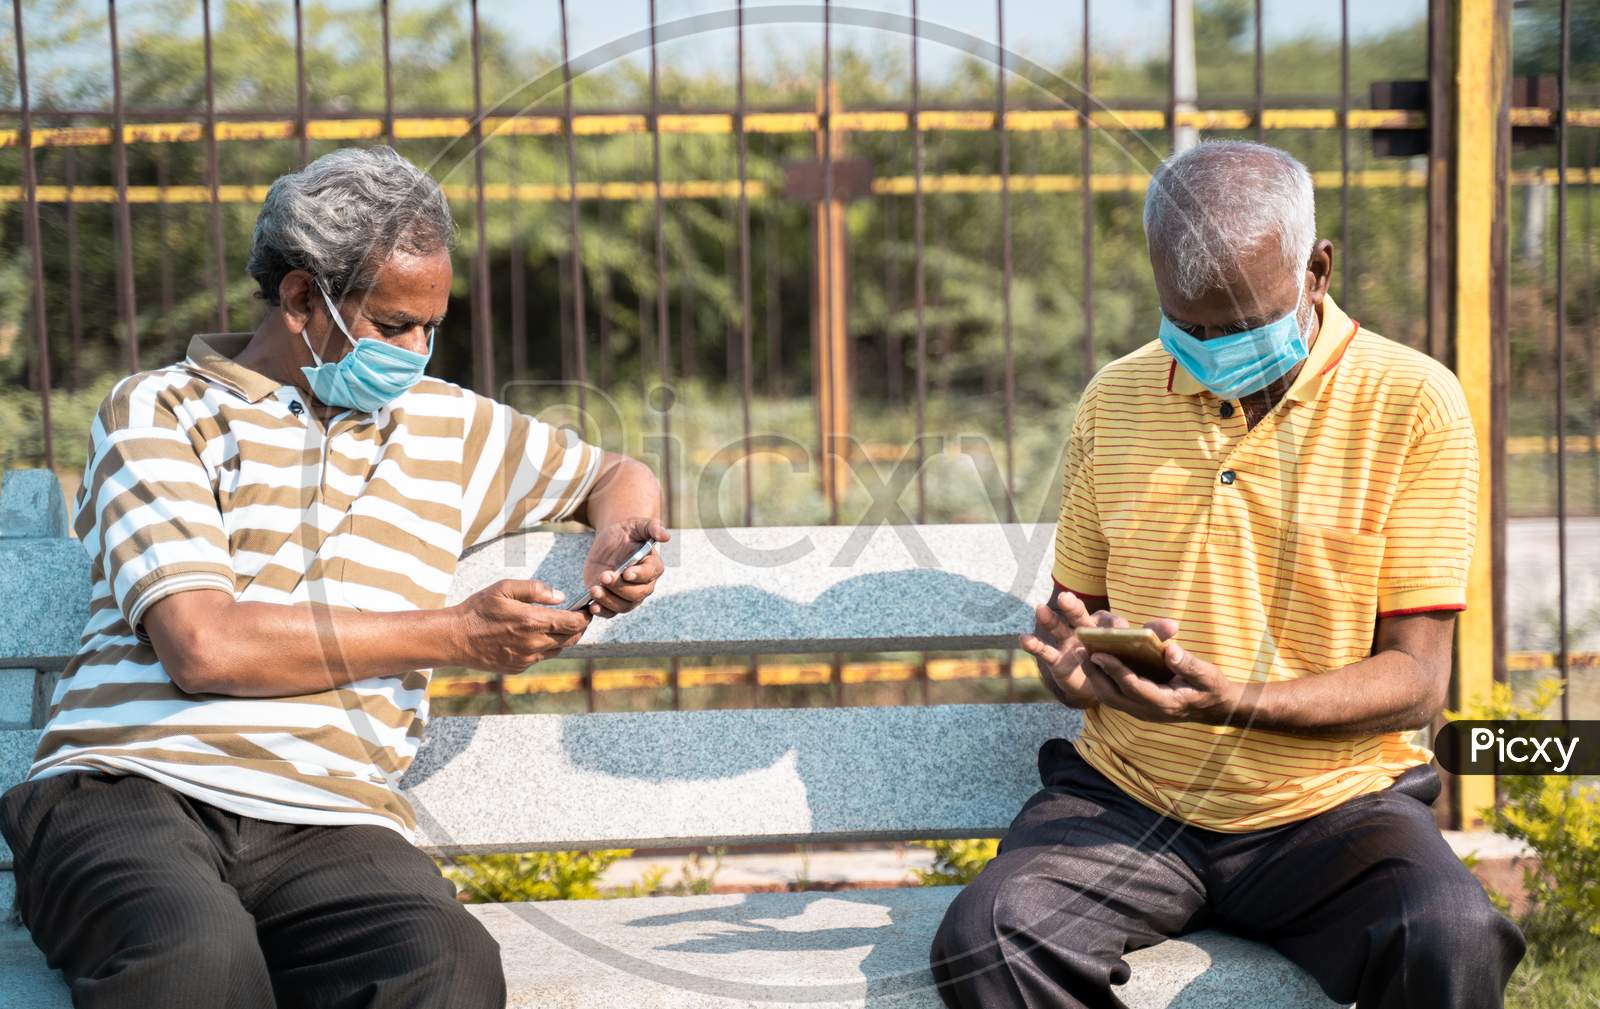 Two Elderly People With Medical Face Mask Busy Using Mobile Phone While Sitting At Park While Maintaining Social Distance - Concept Seniors Using Smartphone, Technology, Social Media And Apps